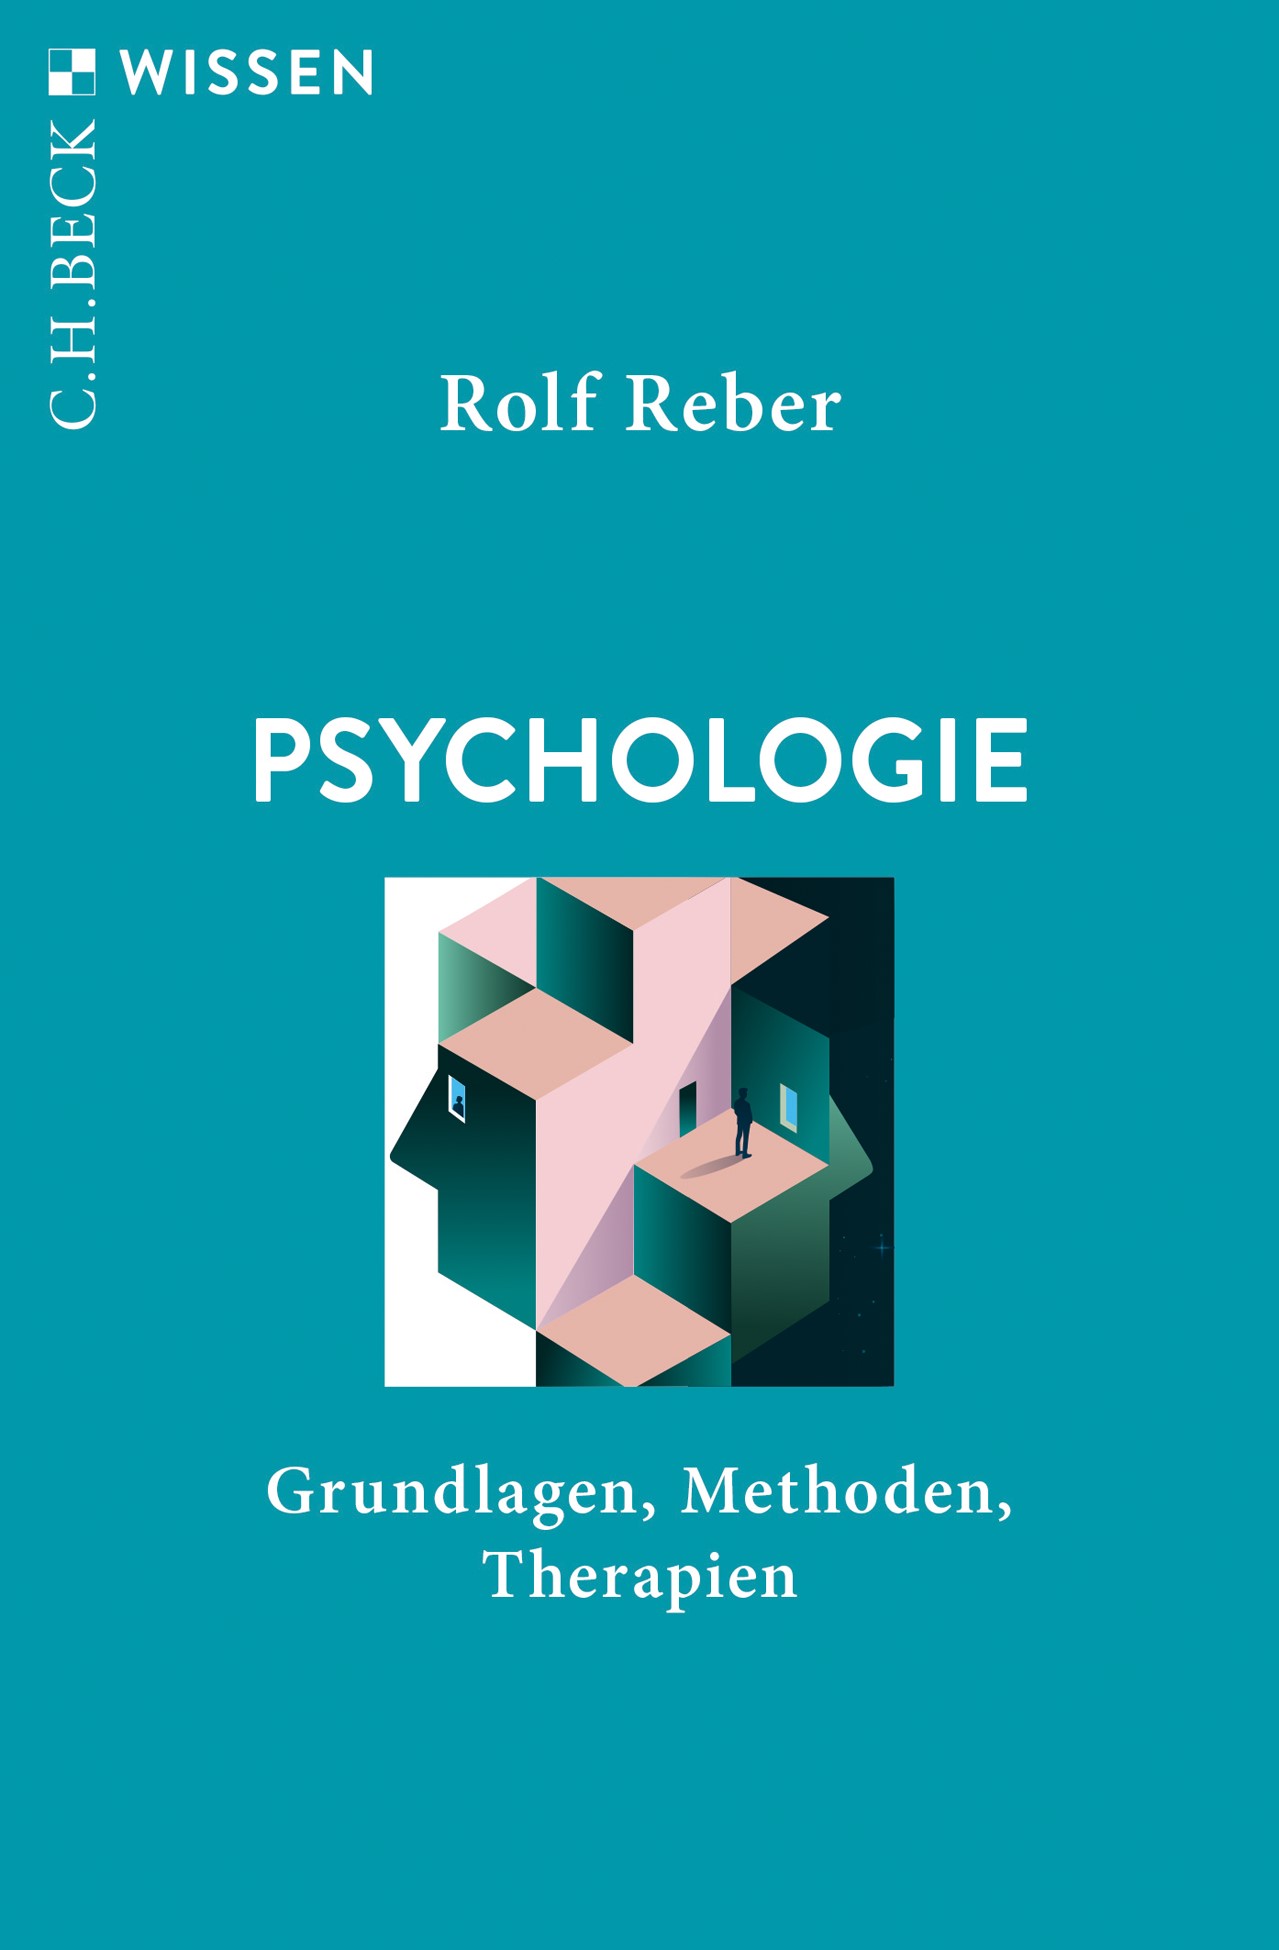 Book cover for "Psychologie". Blue backgroun with abstract squares, building, windows.